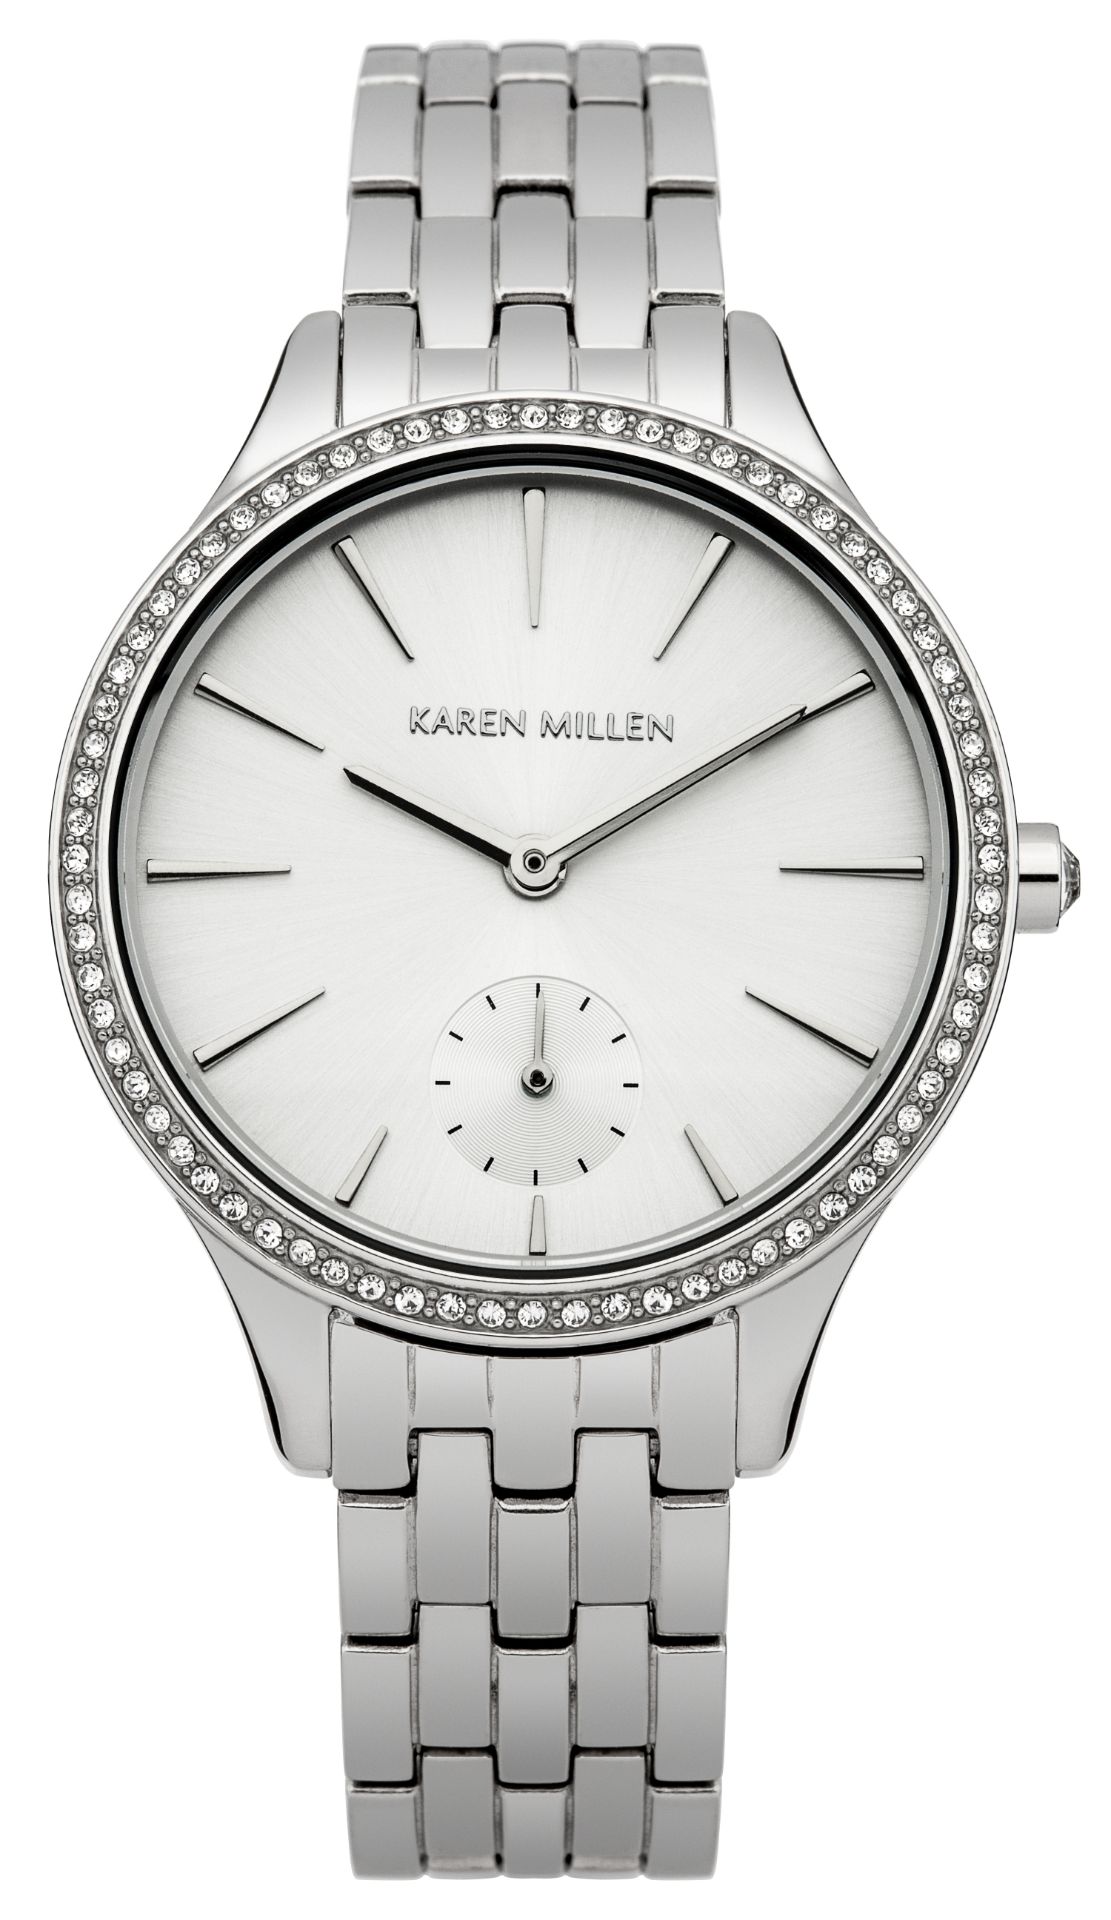 Karen Millen Ladies  Analogue Quartz Watch with White Dial and Silver Stainless Steel Strap. - Image 3 of 3